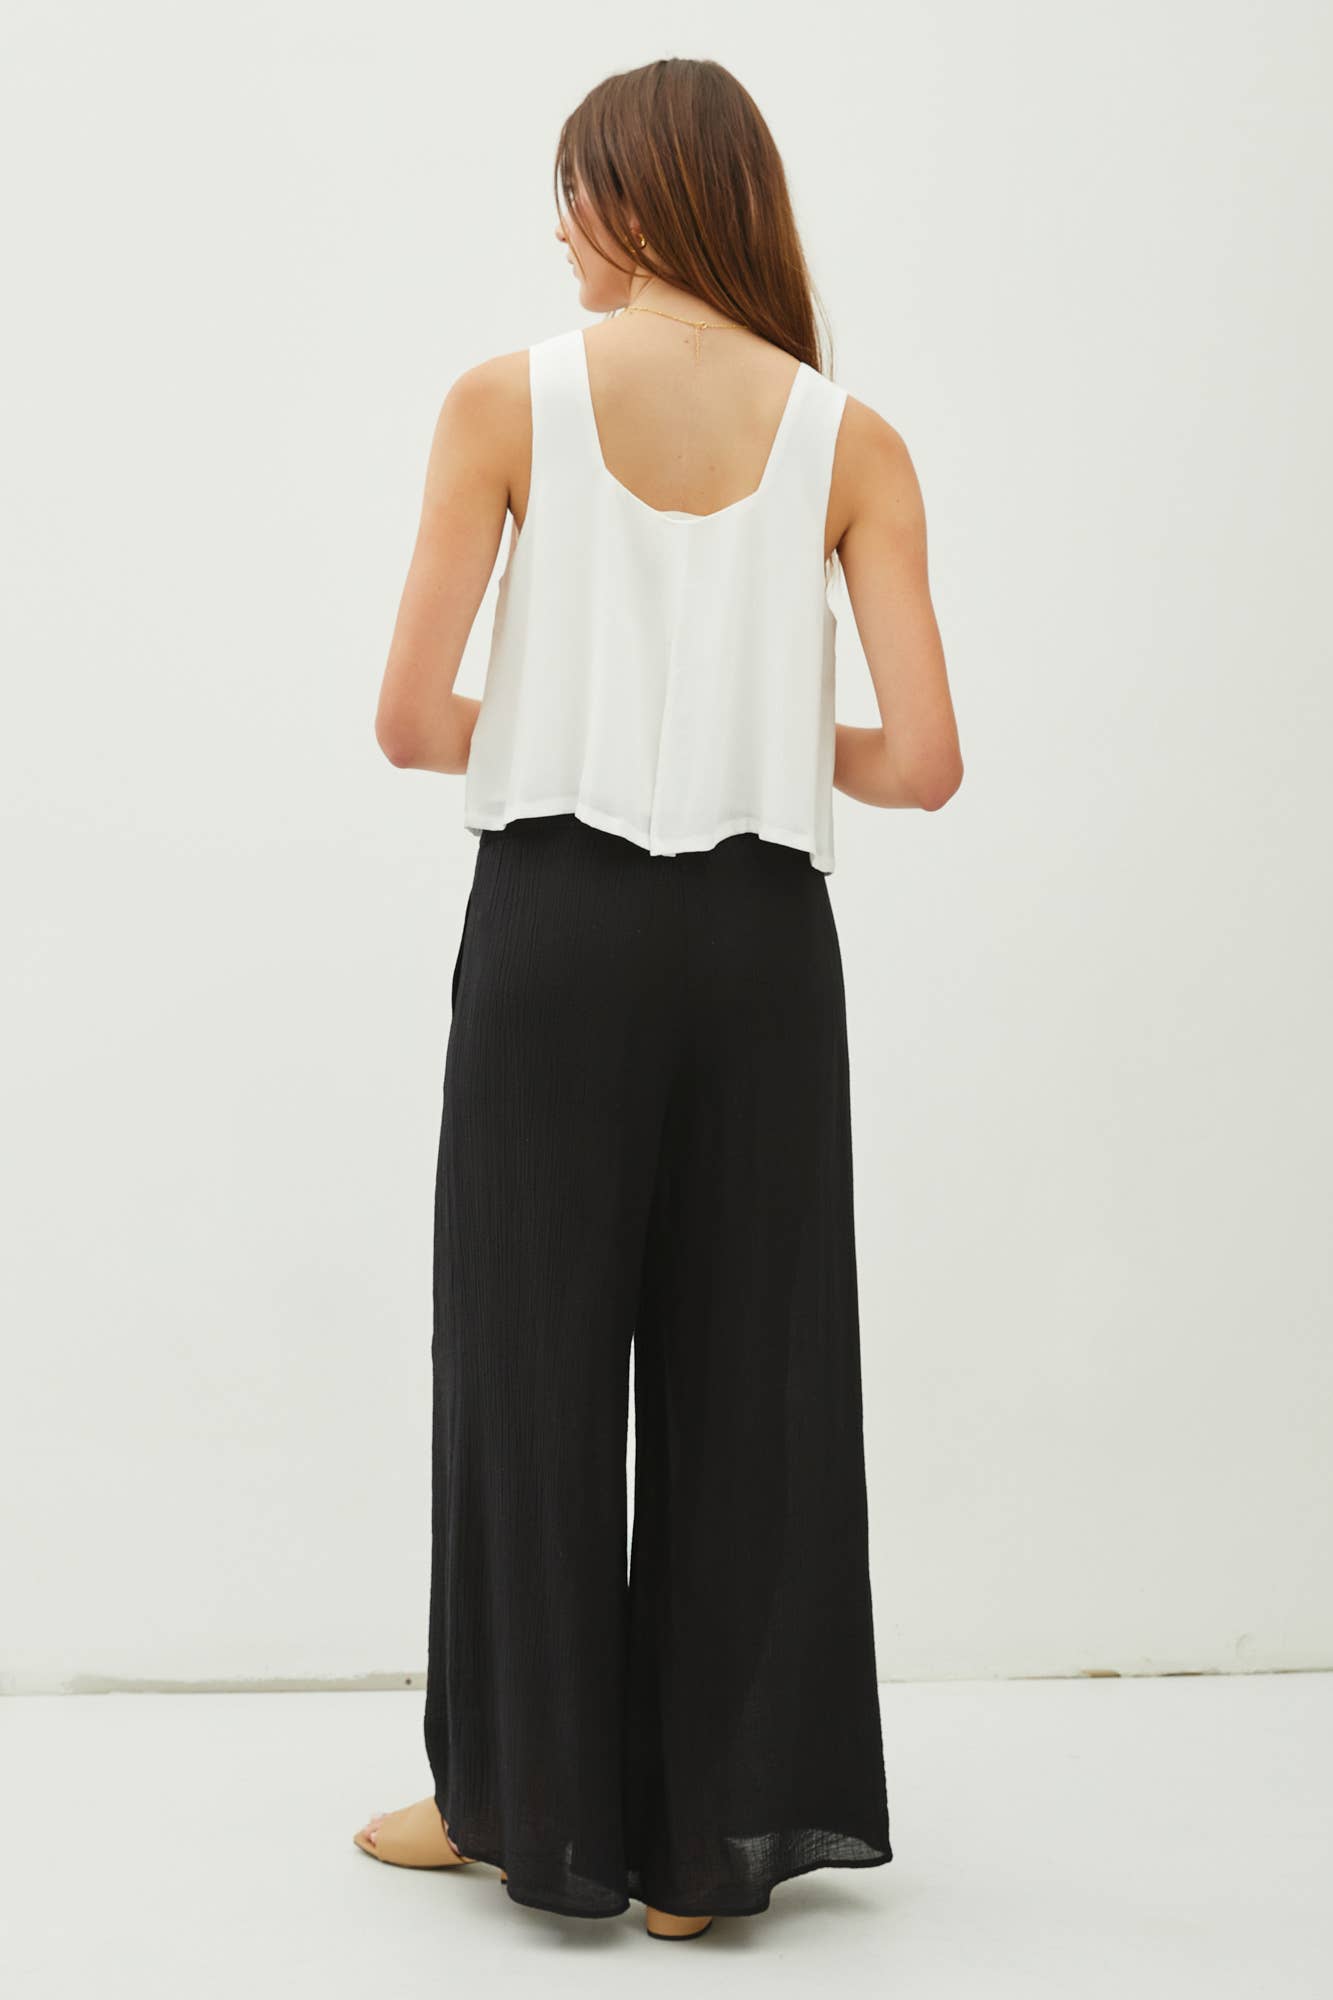 Tess - RAYON FLOWY SQUARE NECK CROP TANK TOP by Be Cool